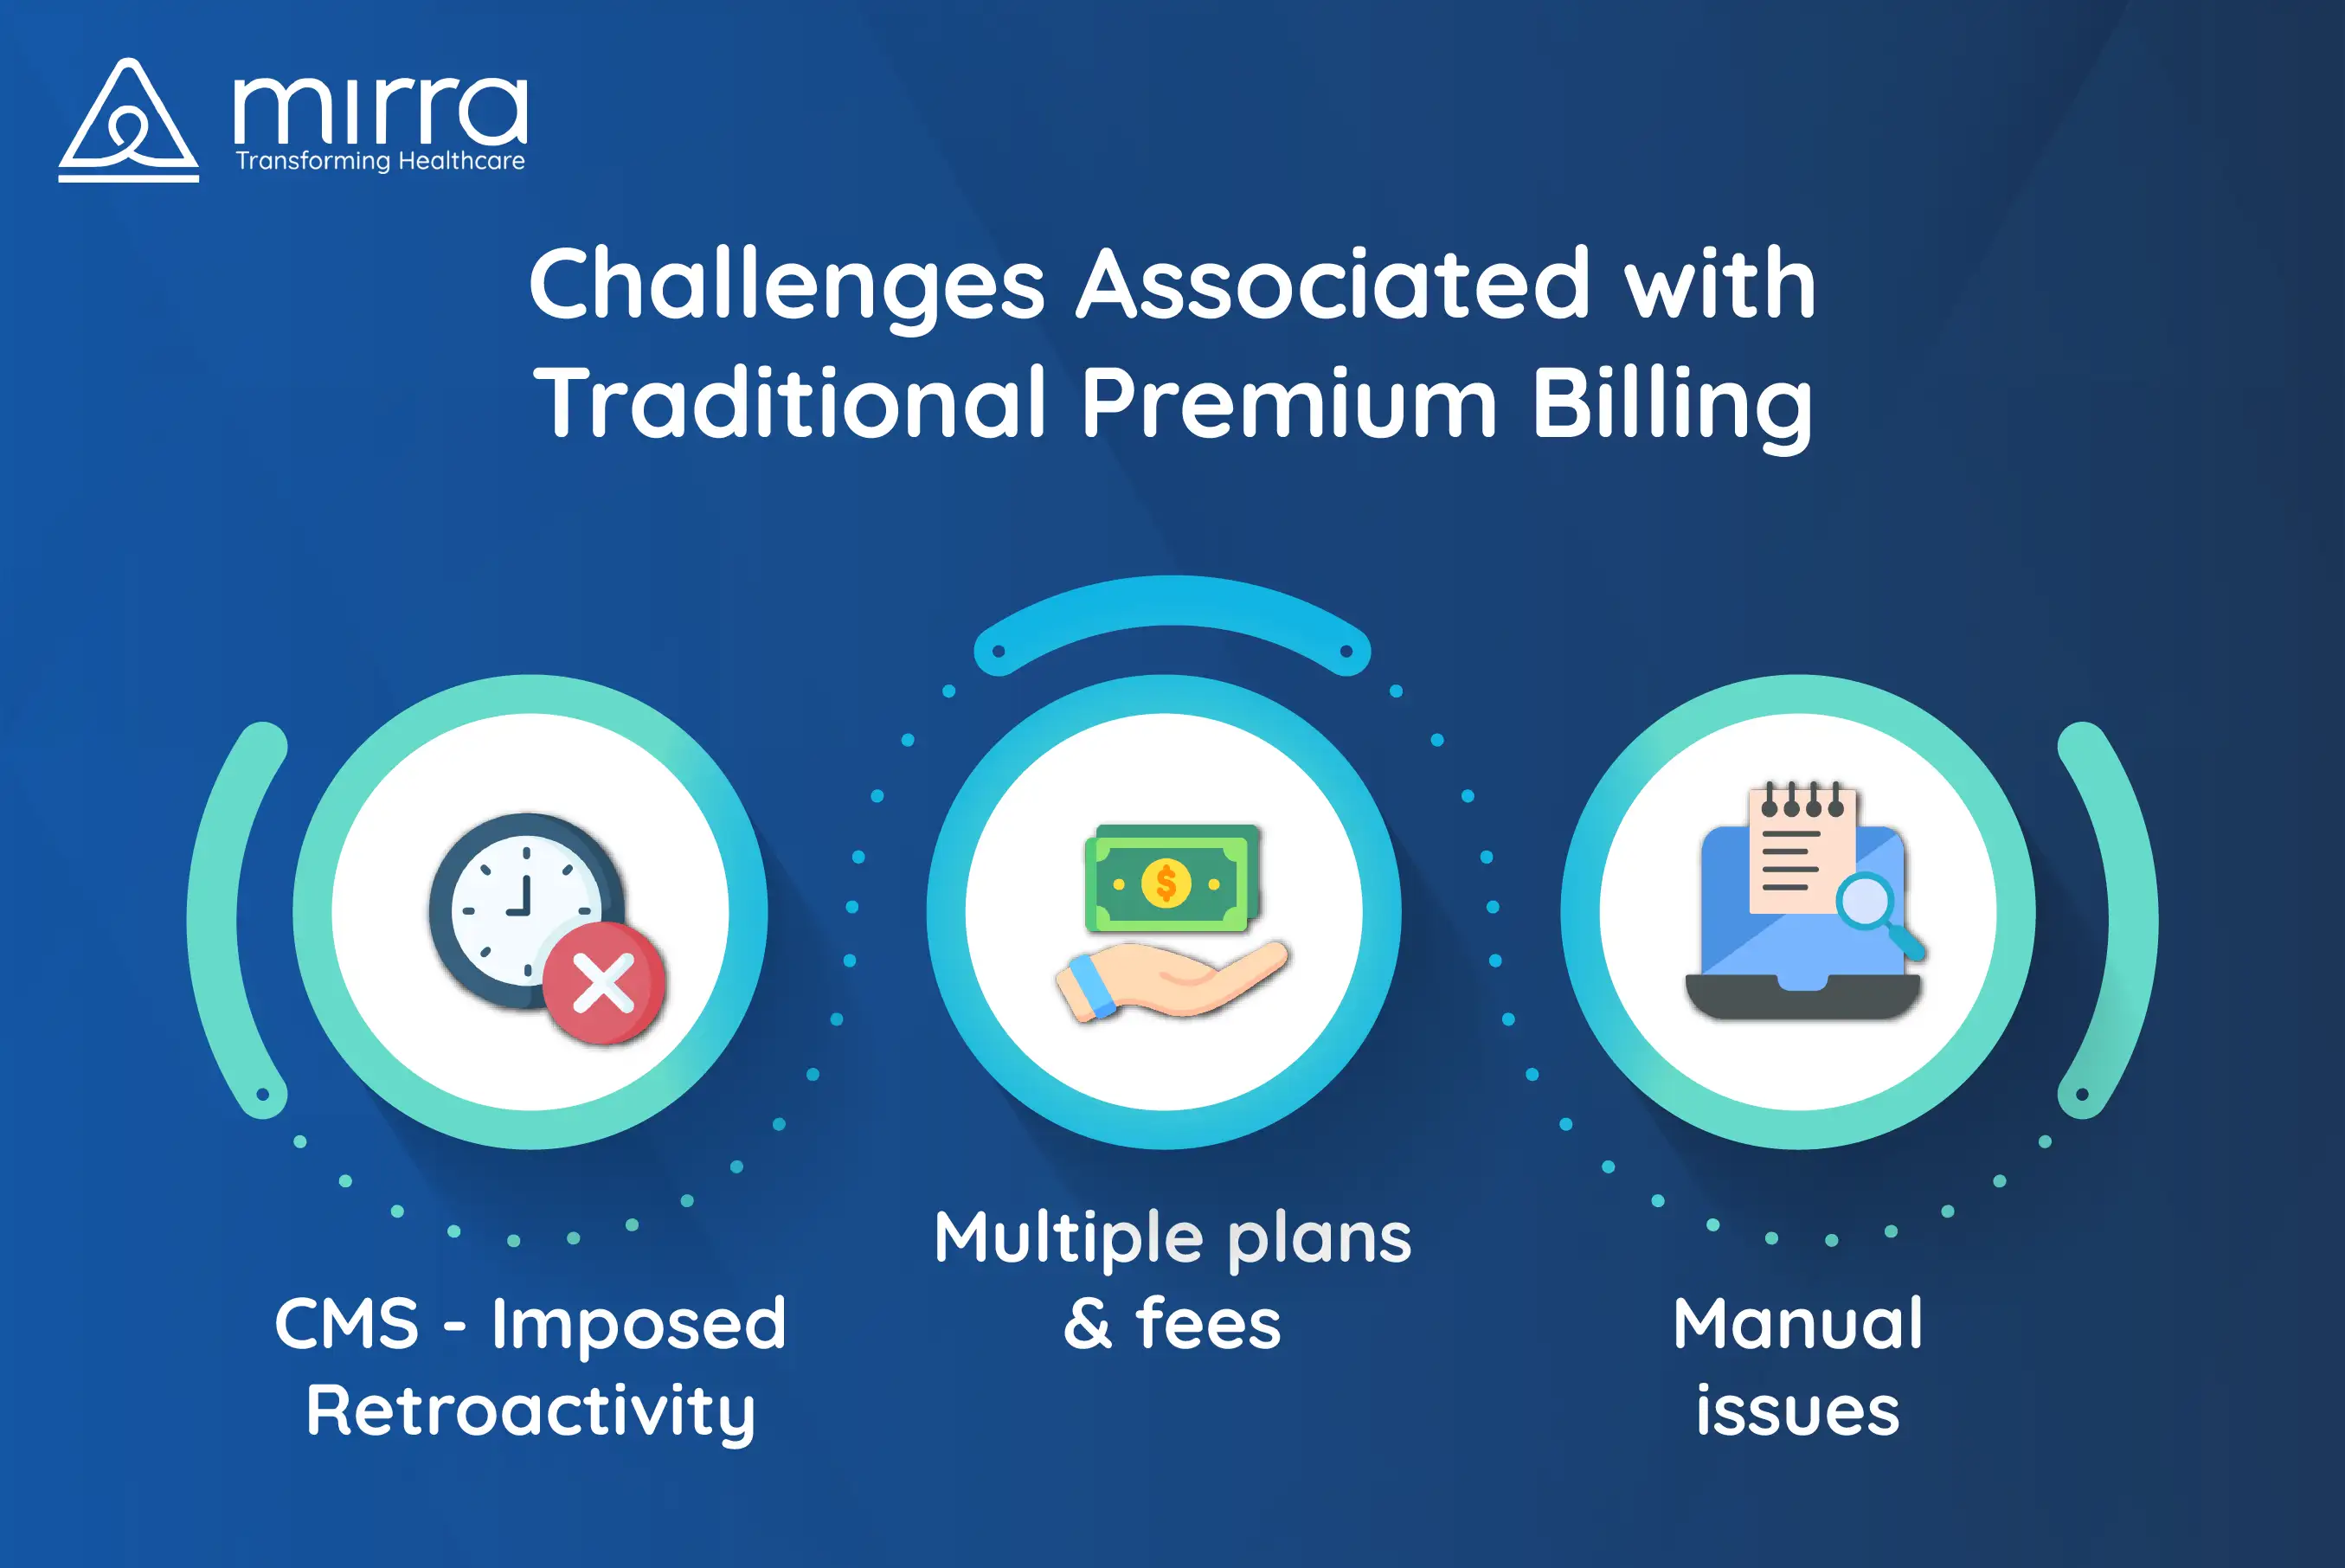 The Challenges Associated with Traditional Premium Billing